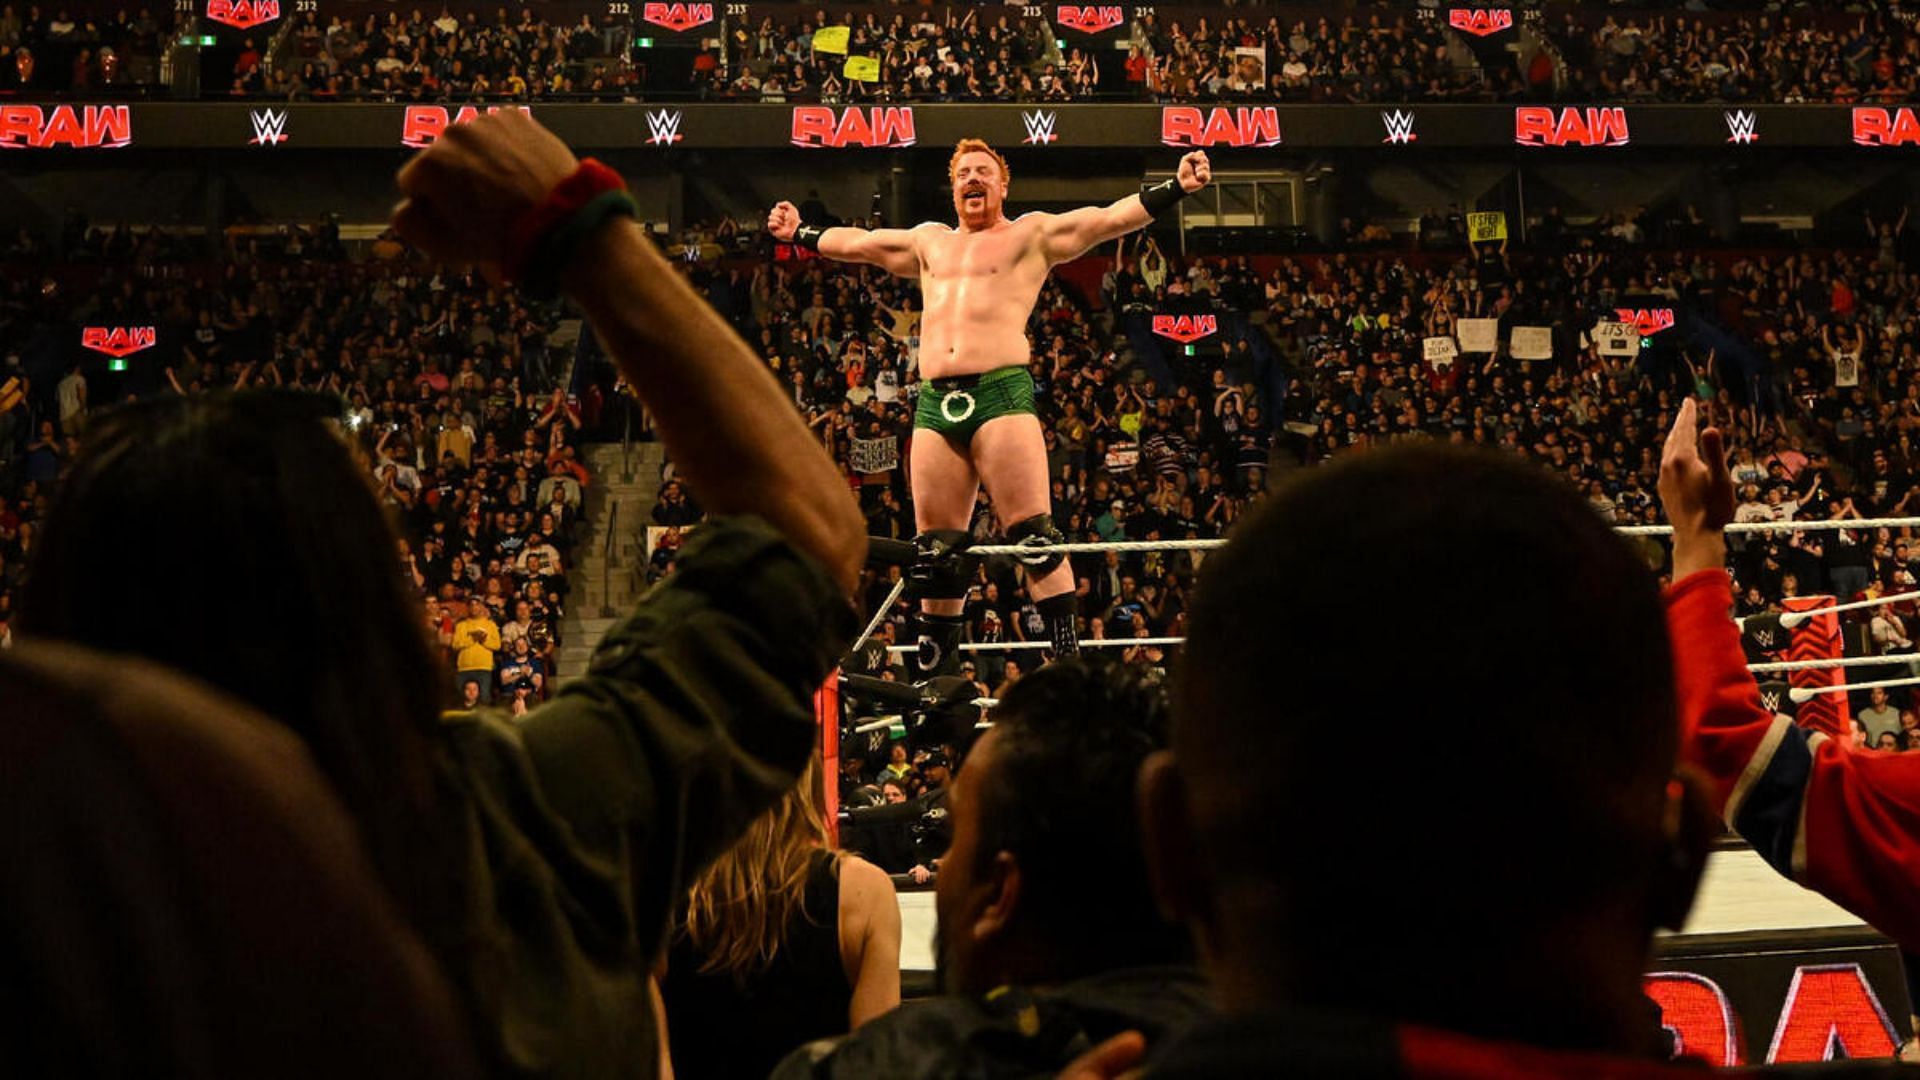 Sheamus celebrating after his victory on RAW.